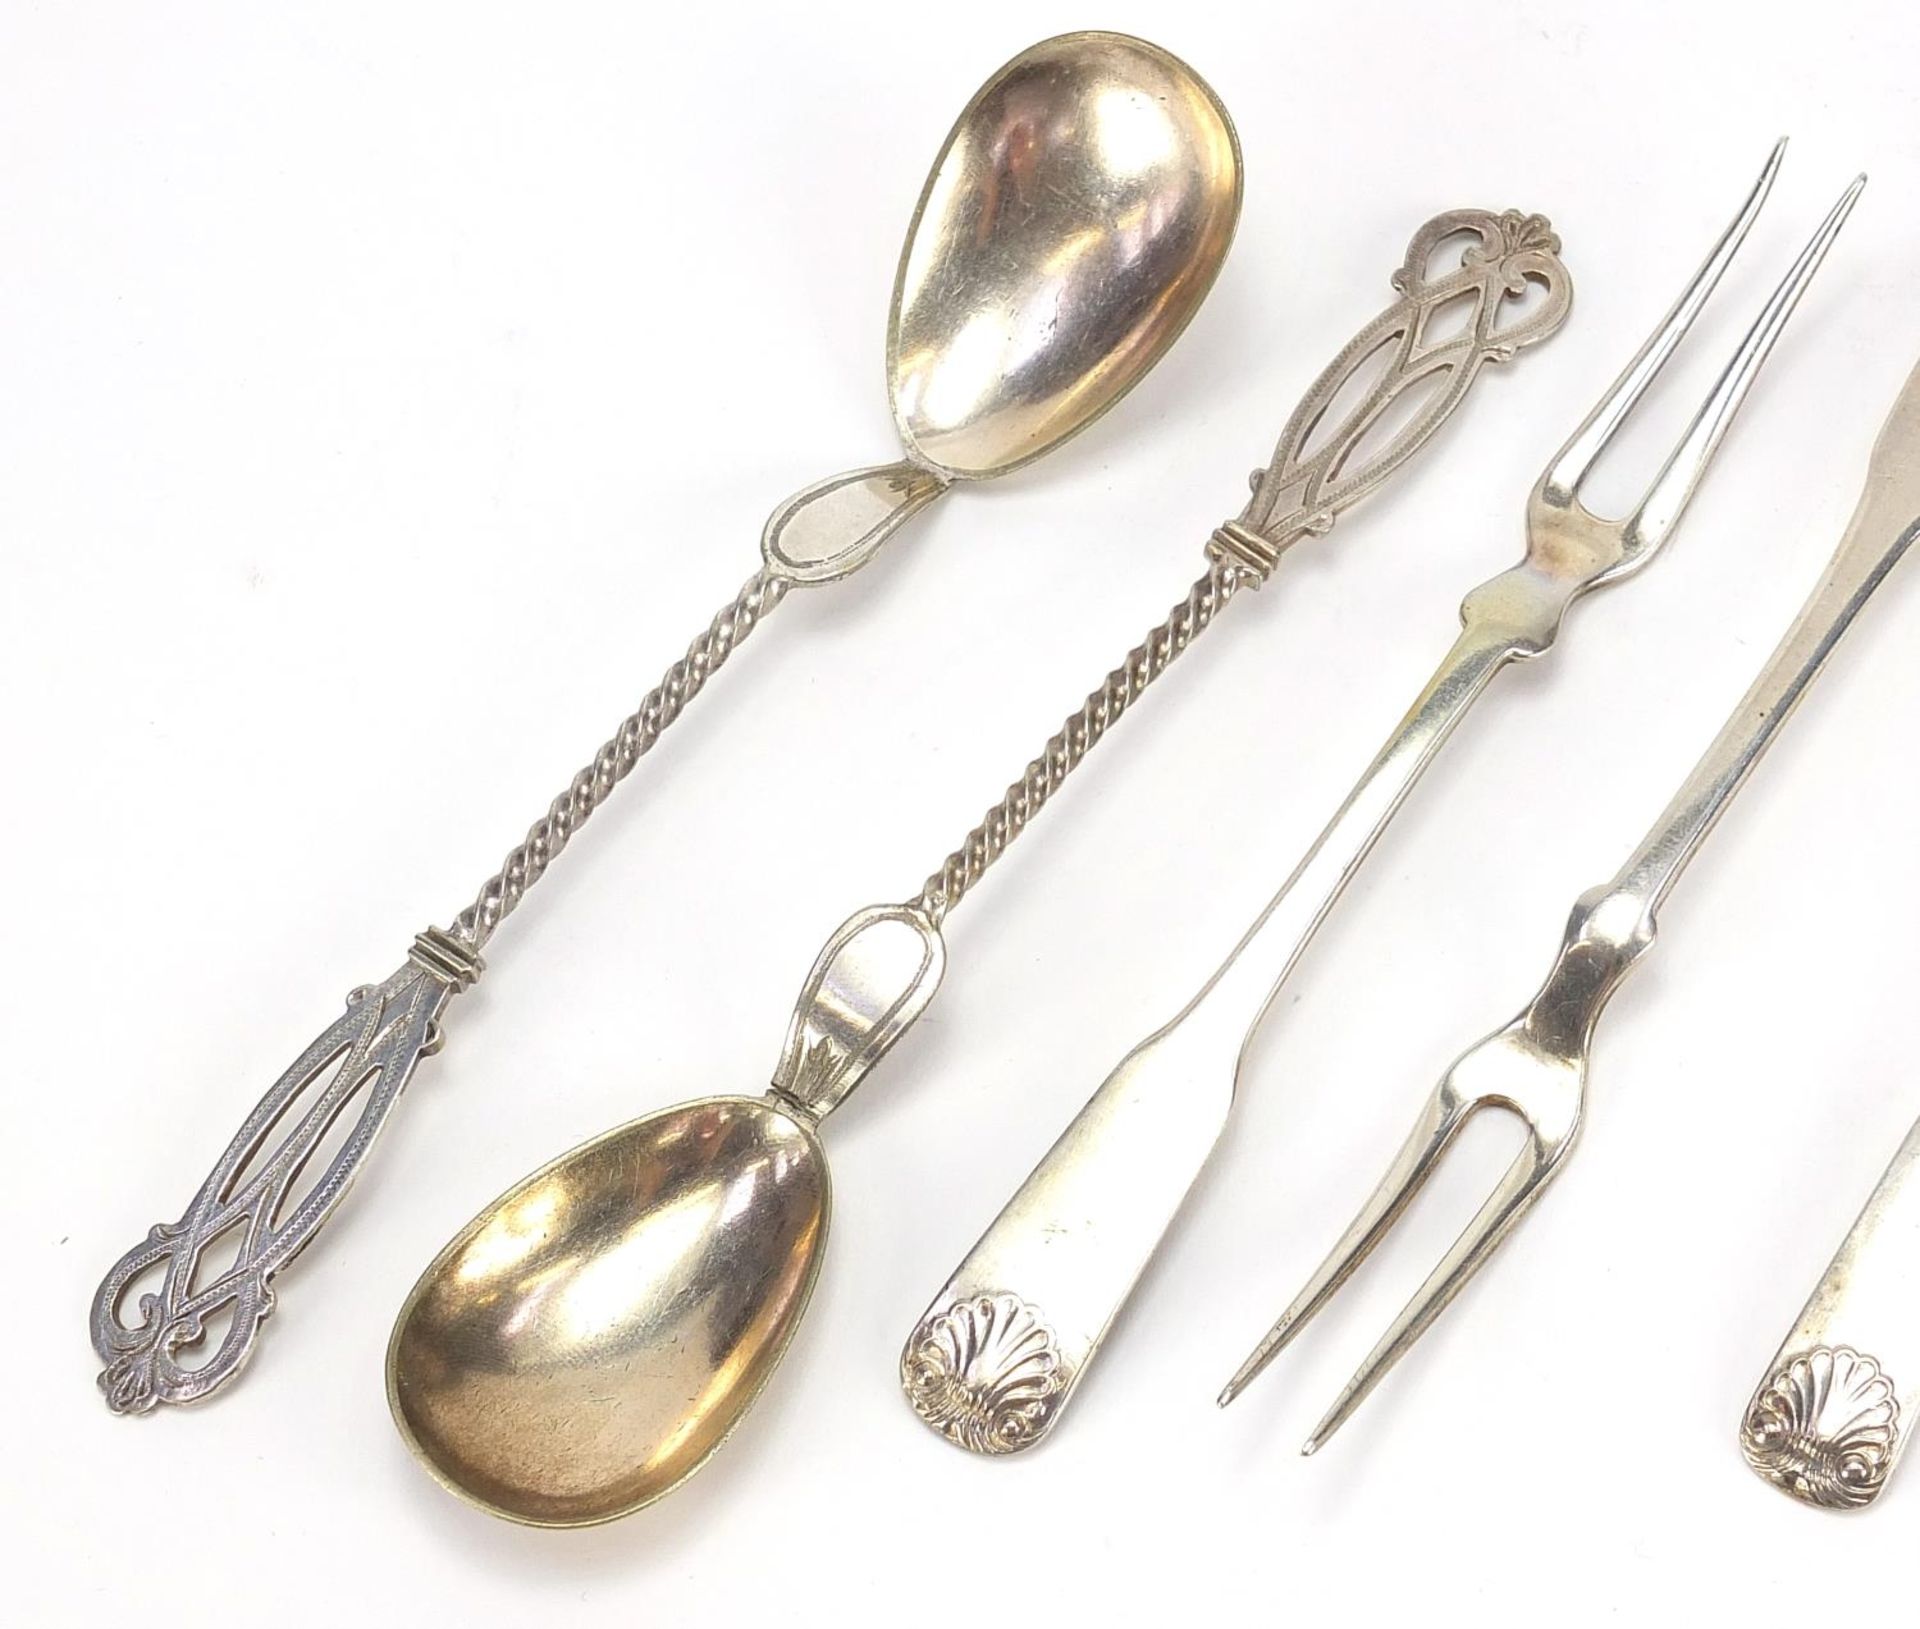 Danish silver and white metal cutlery including a toddy ladle, pair of forks and pair of sugar - Image 2 of 6